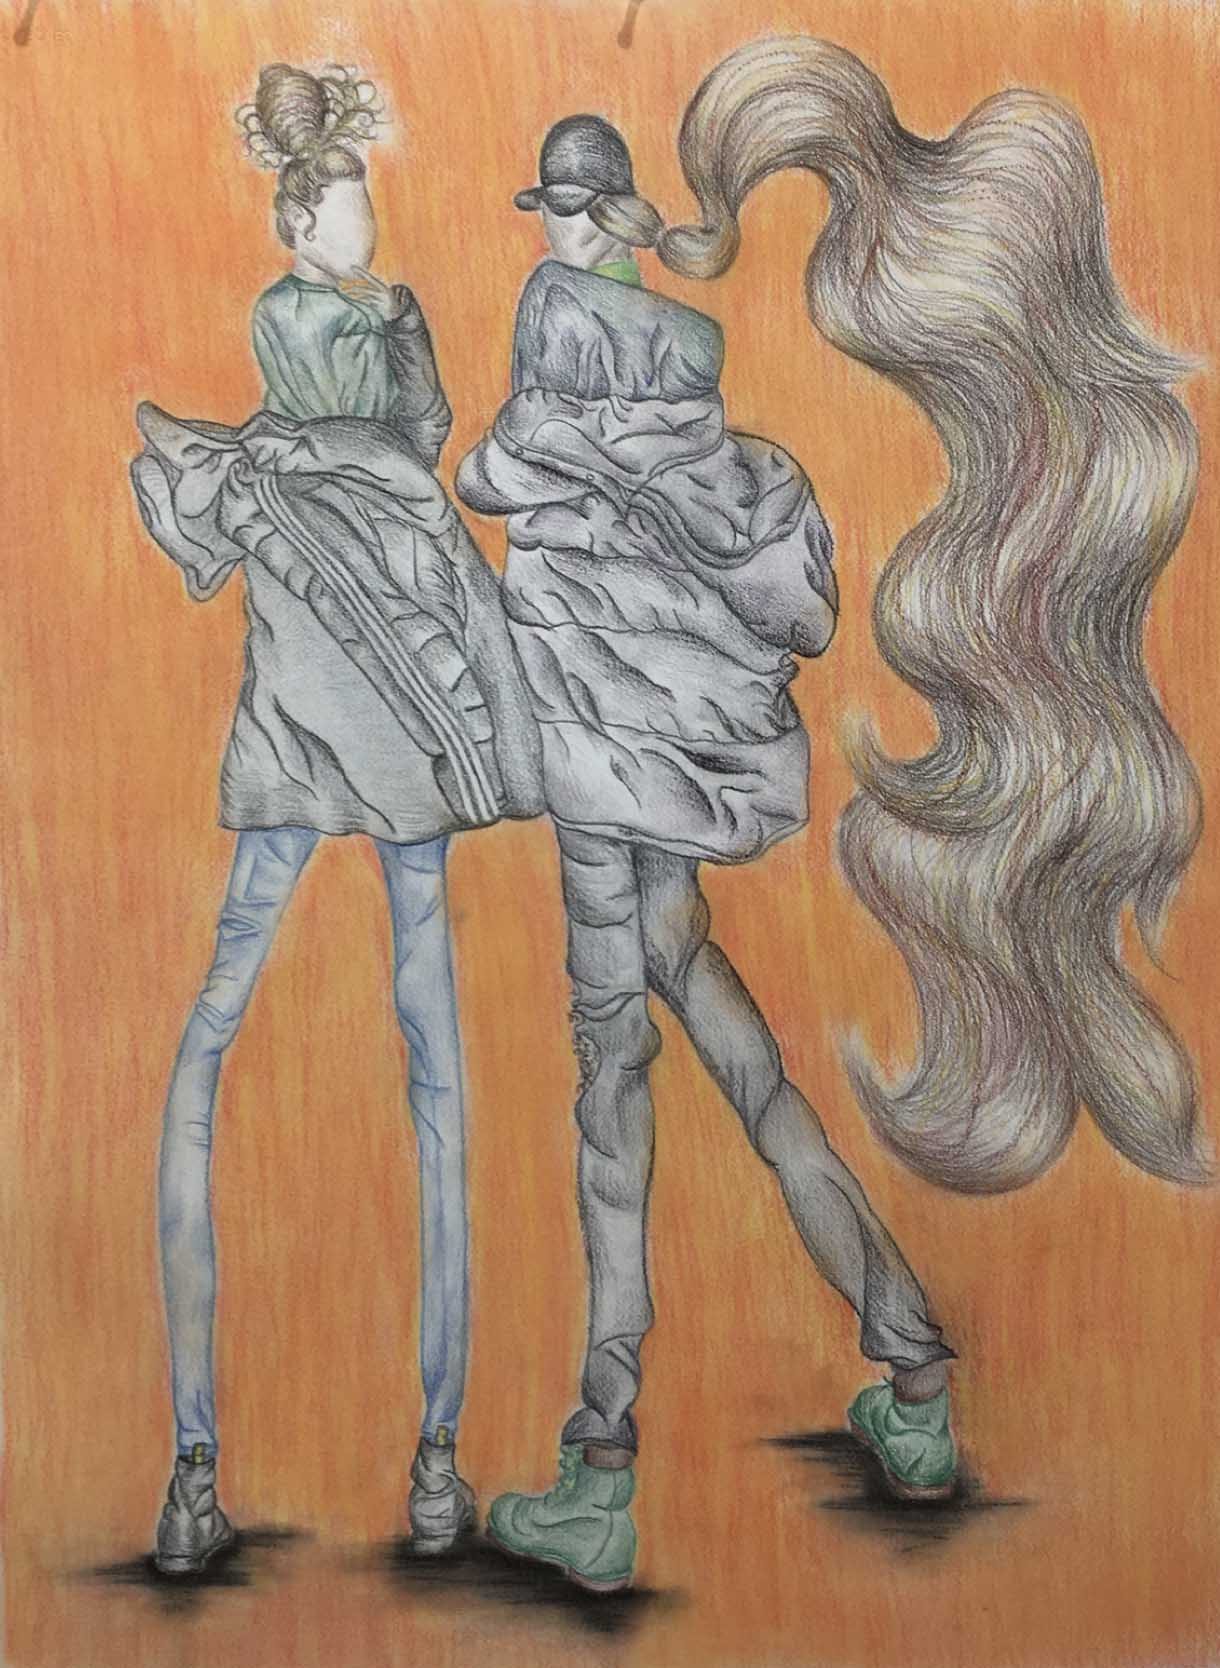  Drawing of two people, one with long, wavy hair. Drawn in earth colors against an orange background.